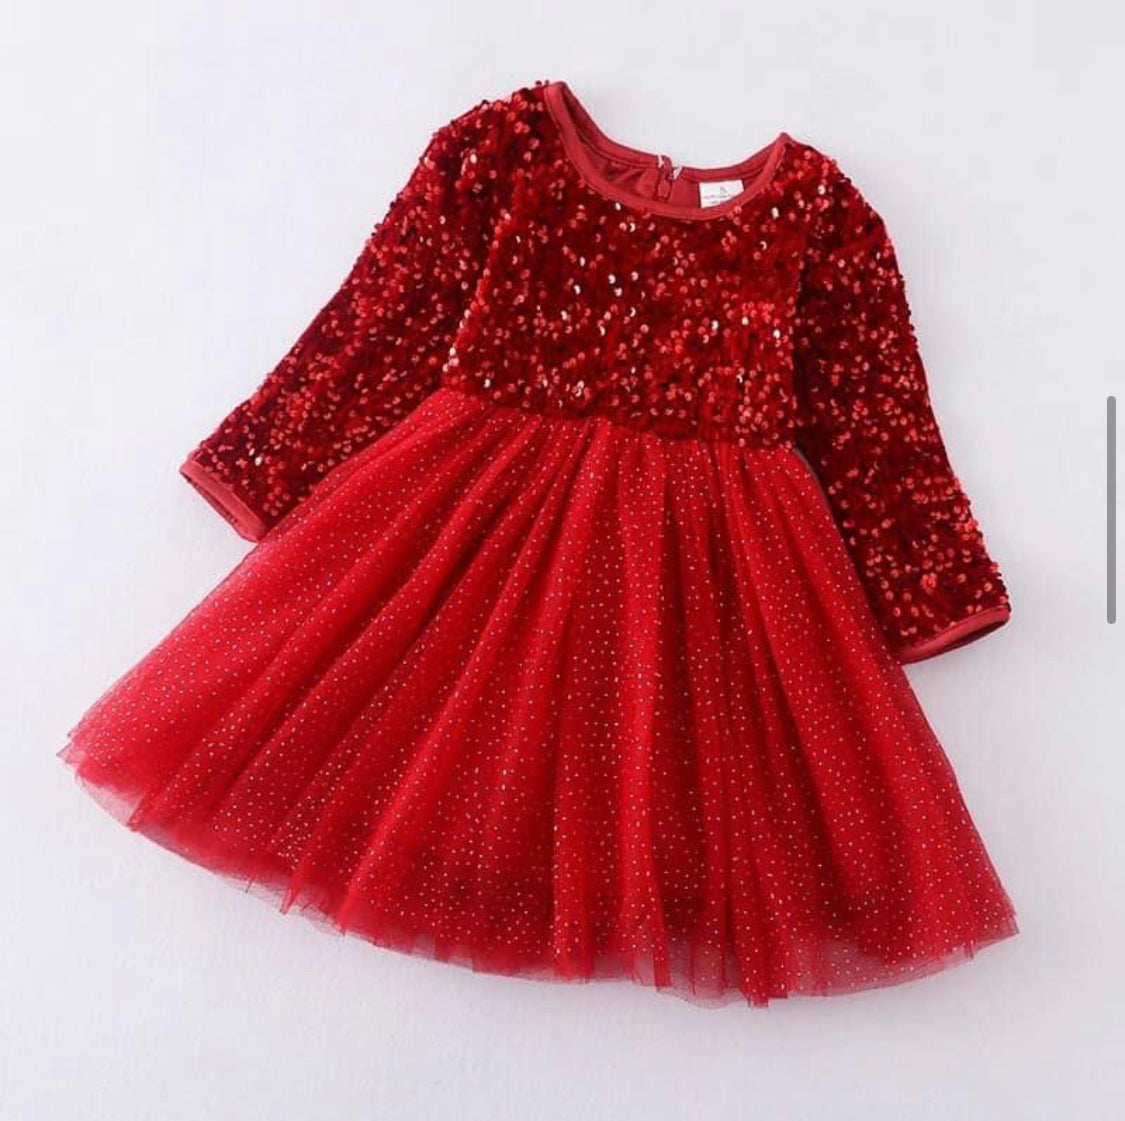 Sequins Holiday Dress